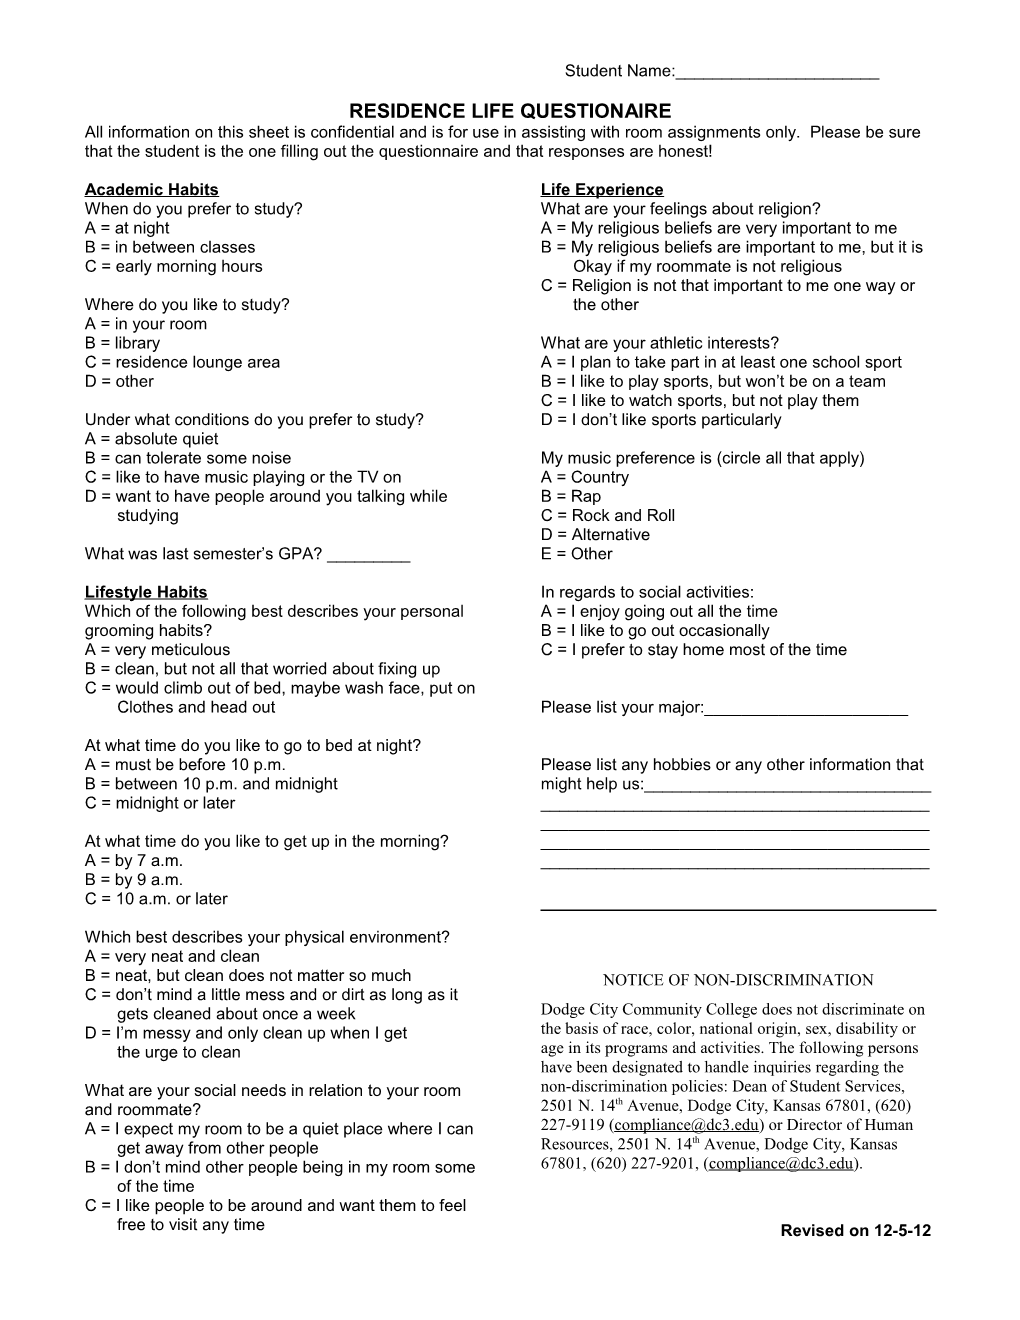 Residence Life Questionaire